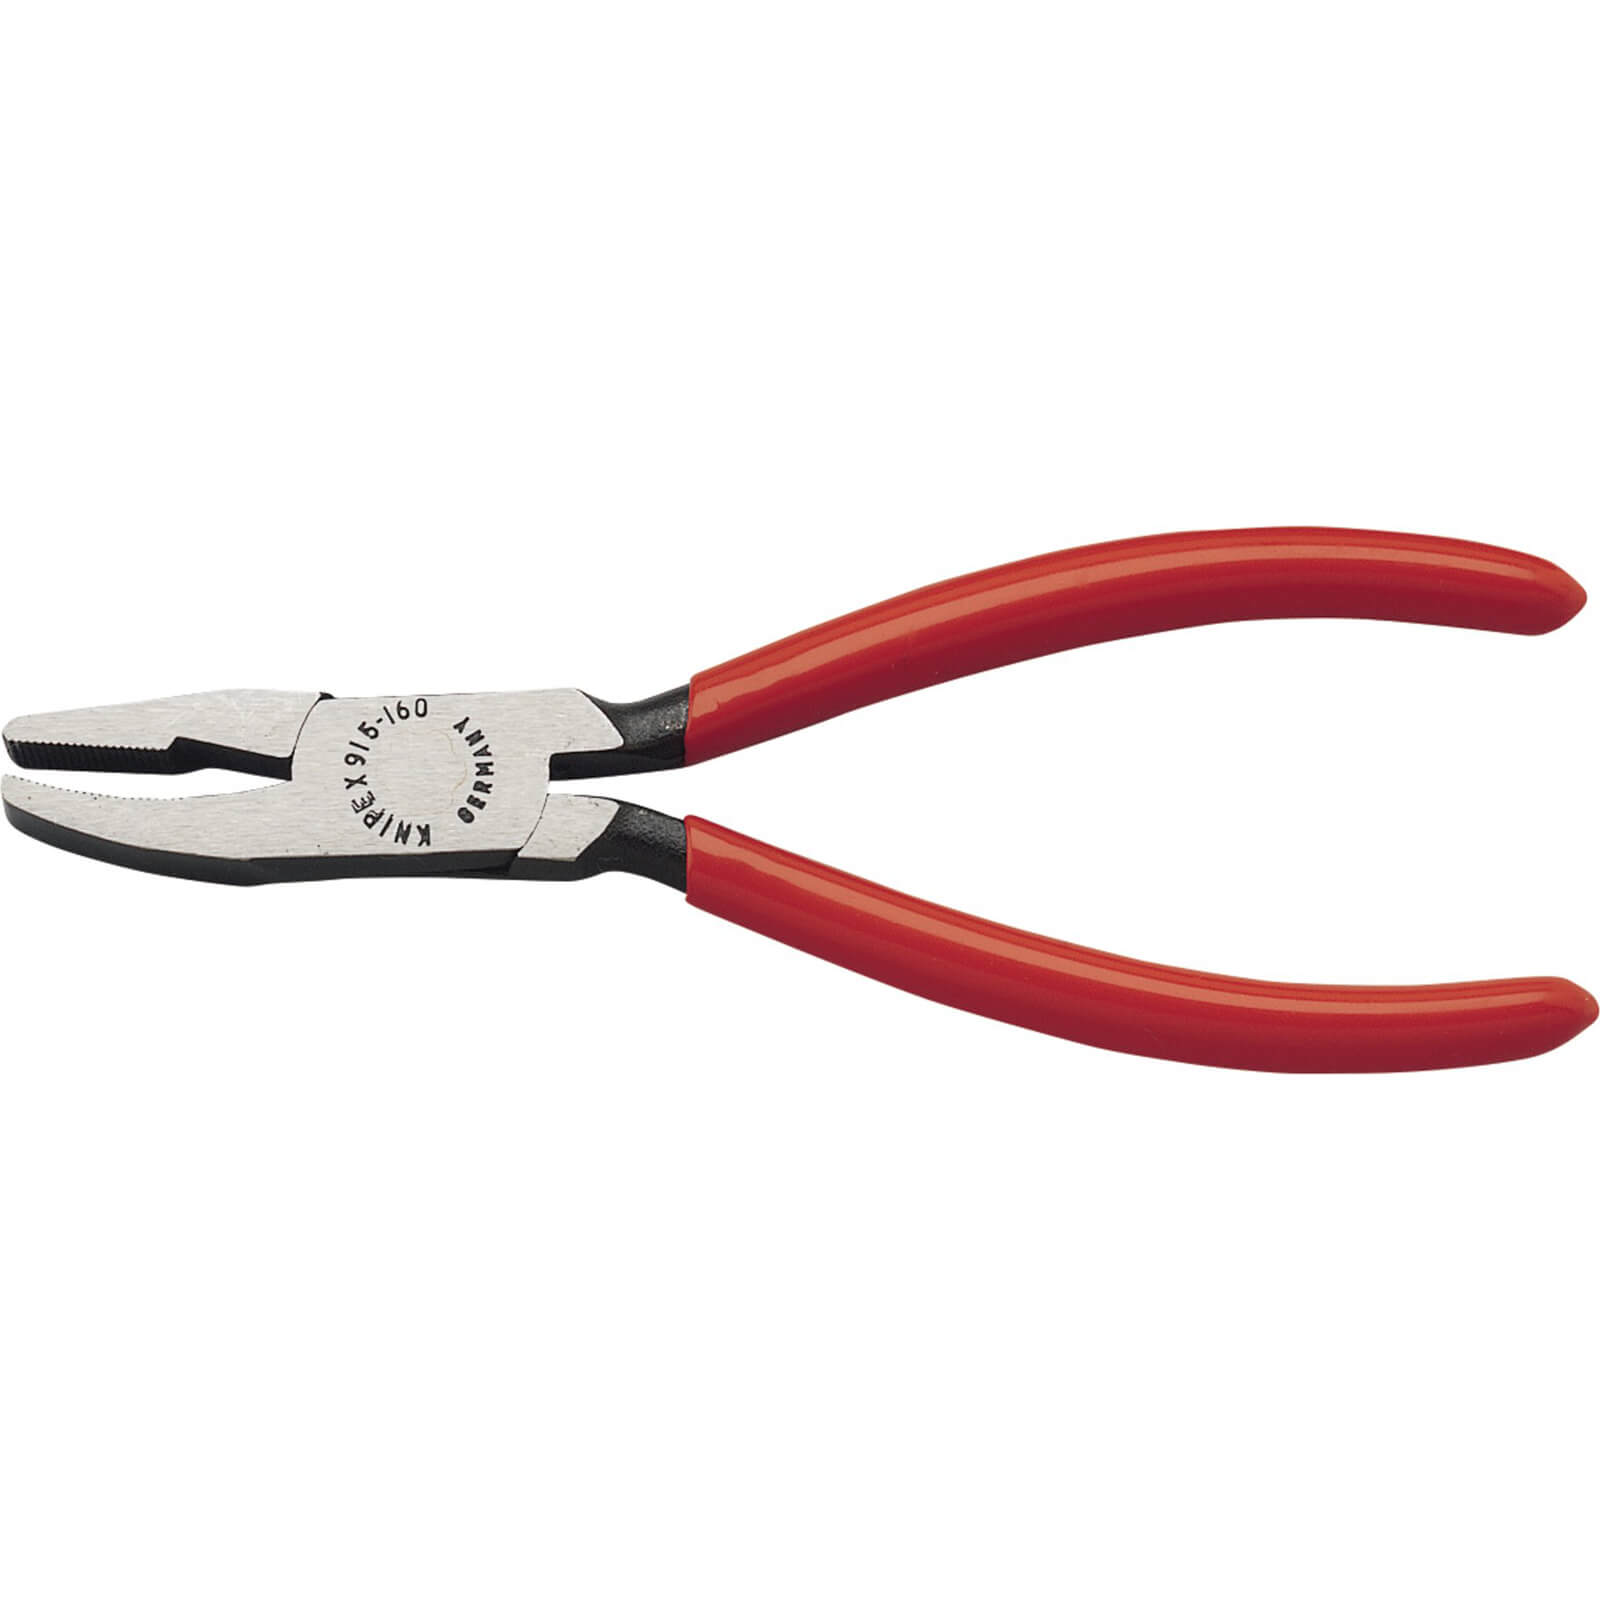 Photo of Knipex Glass Nibbling Pincers 160mm